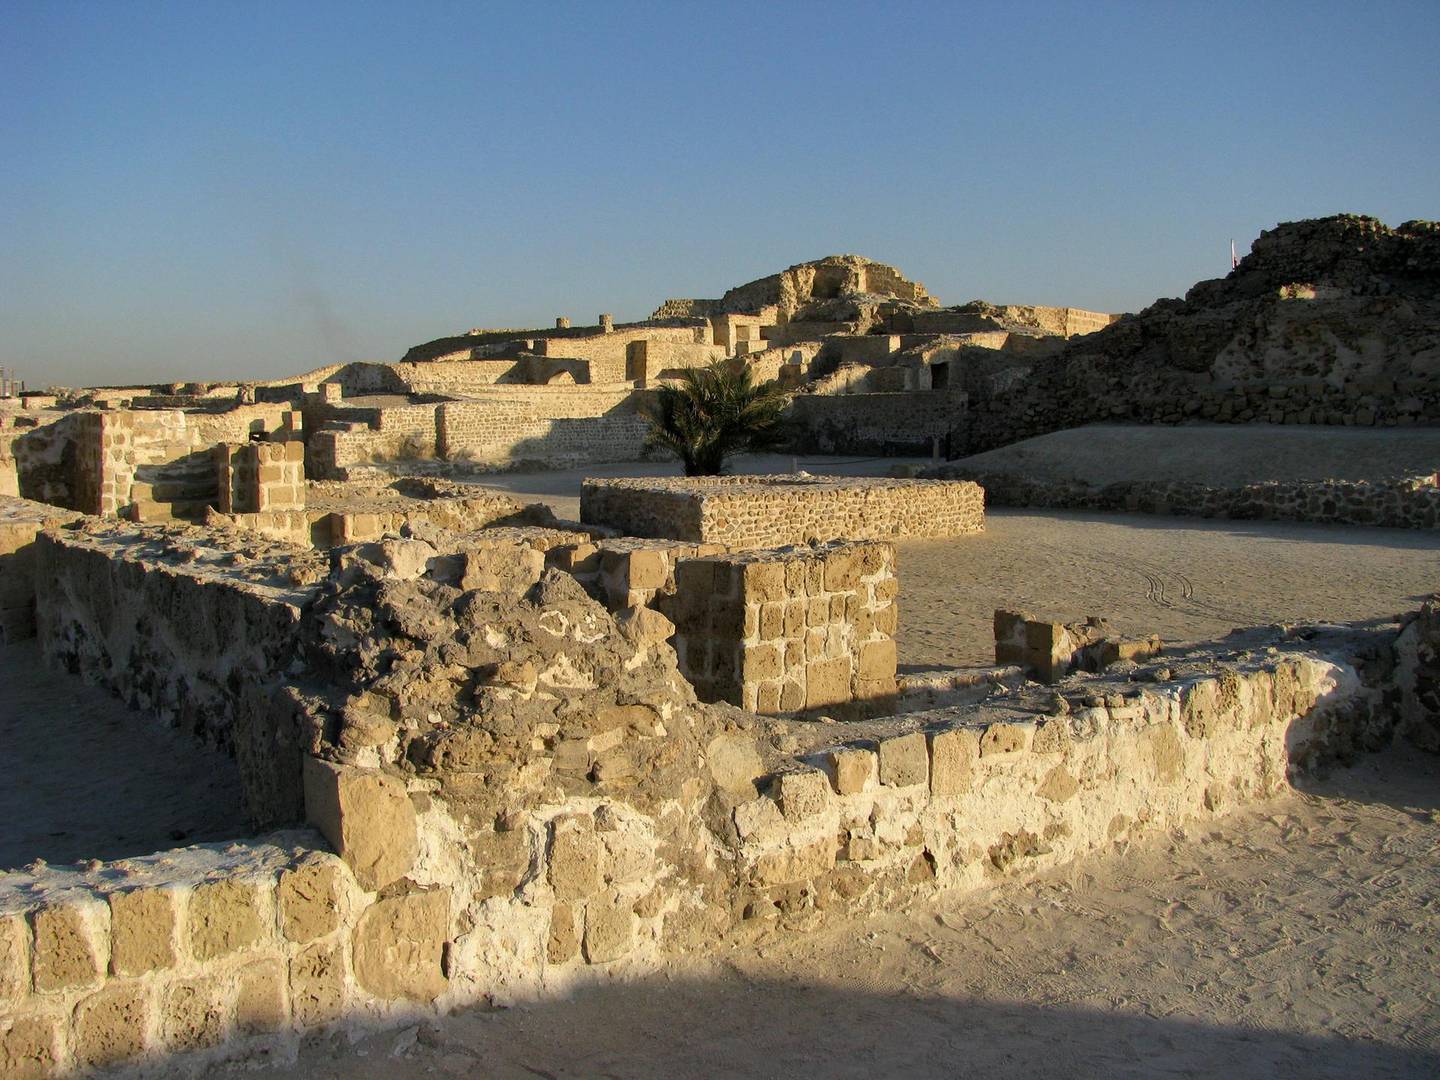 Bahrain Fort is part dates back to the 16th century and is part of the Unesco World Heritage site in Manama. 